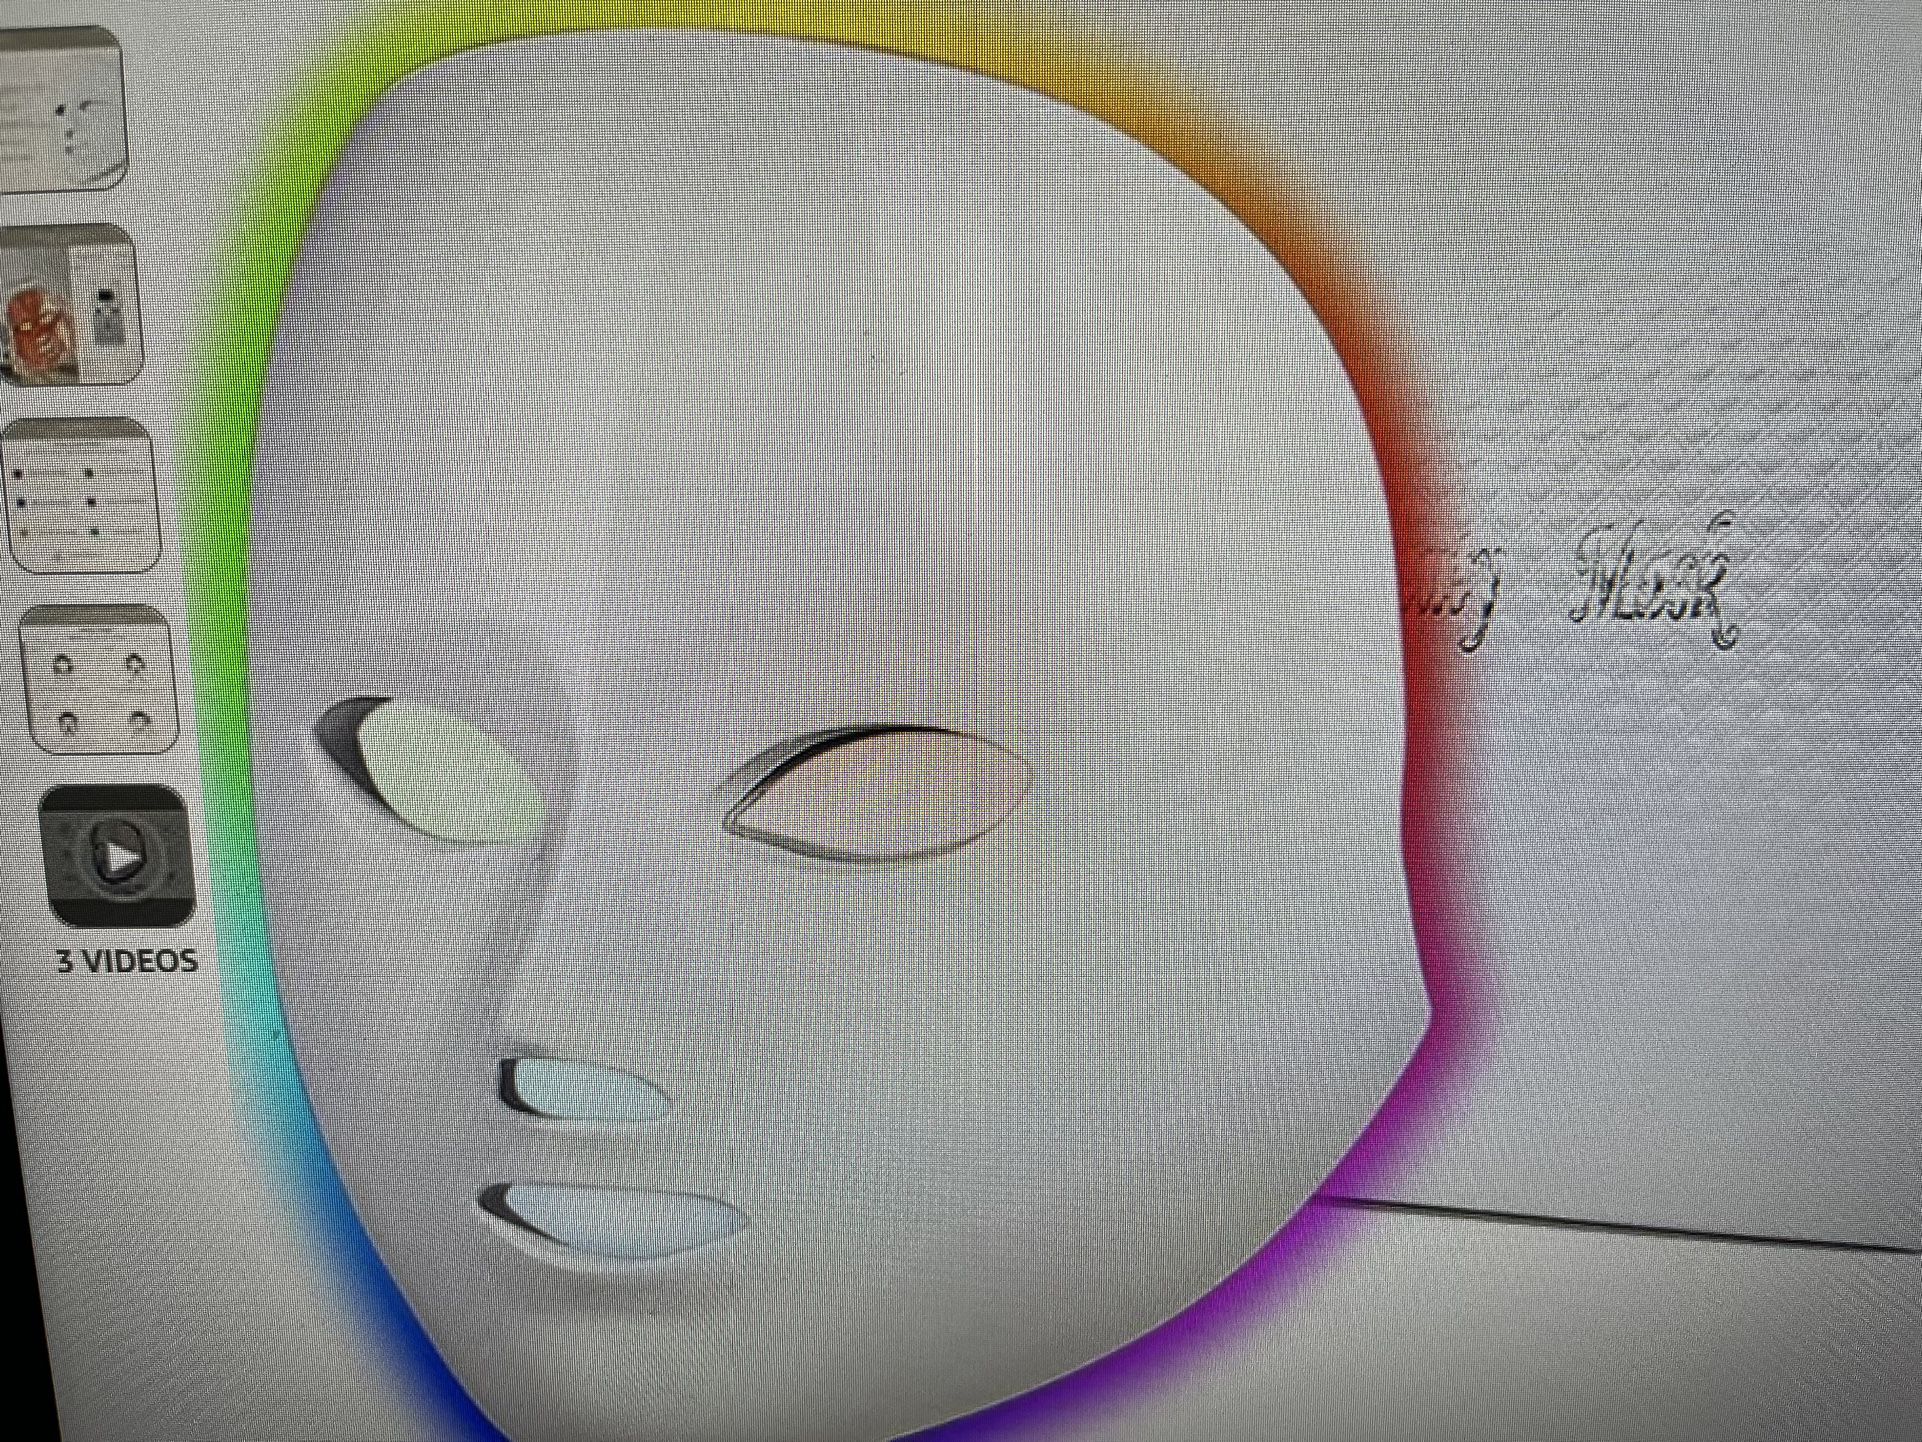 Led Face Mask Light Therapy-7 Colors 